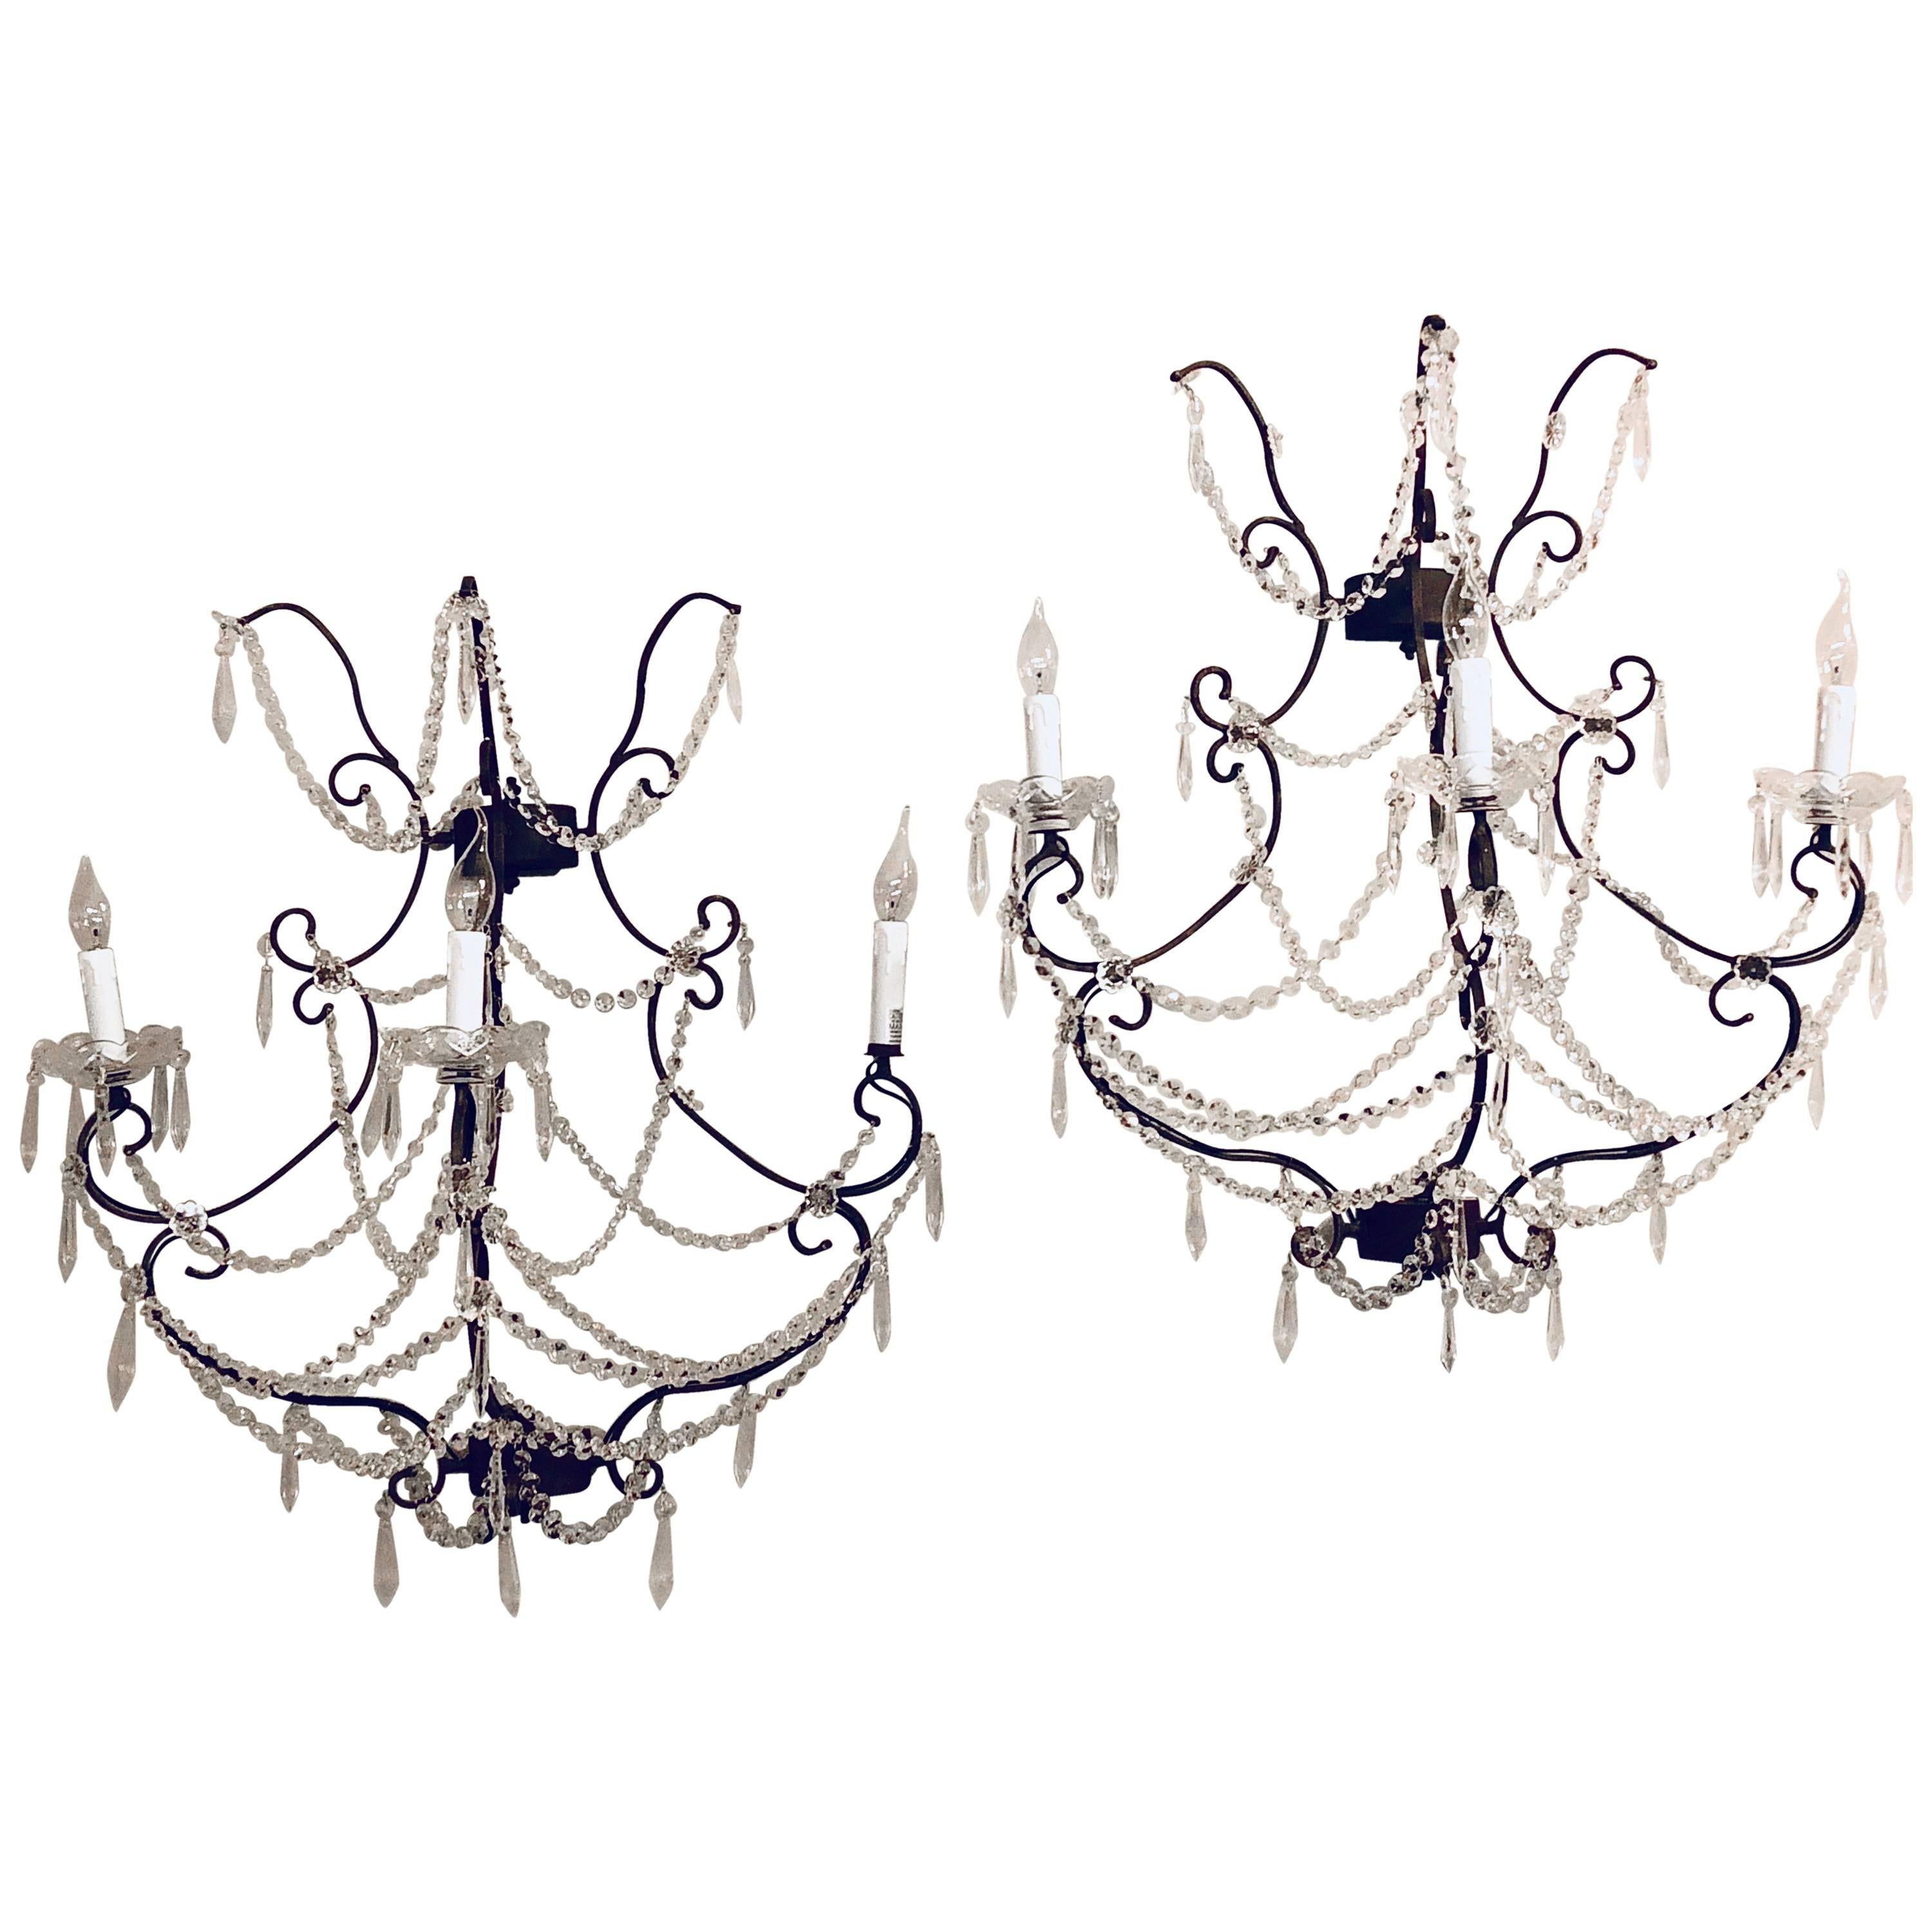 Timothy Oulton, Industrial, Wall Sconces, Steel, Crystal, 1990s